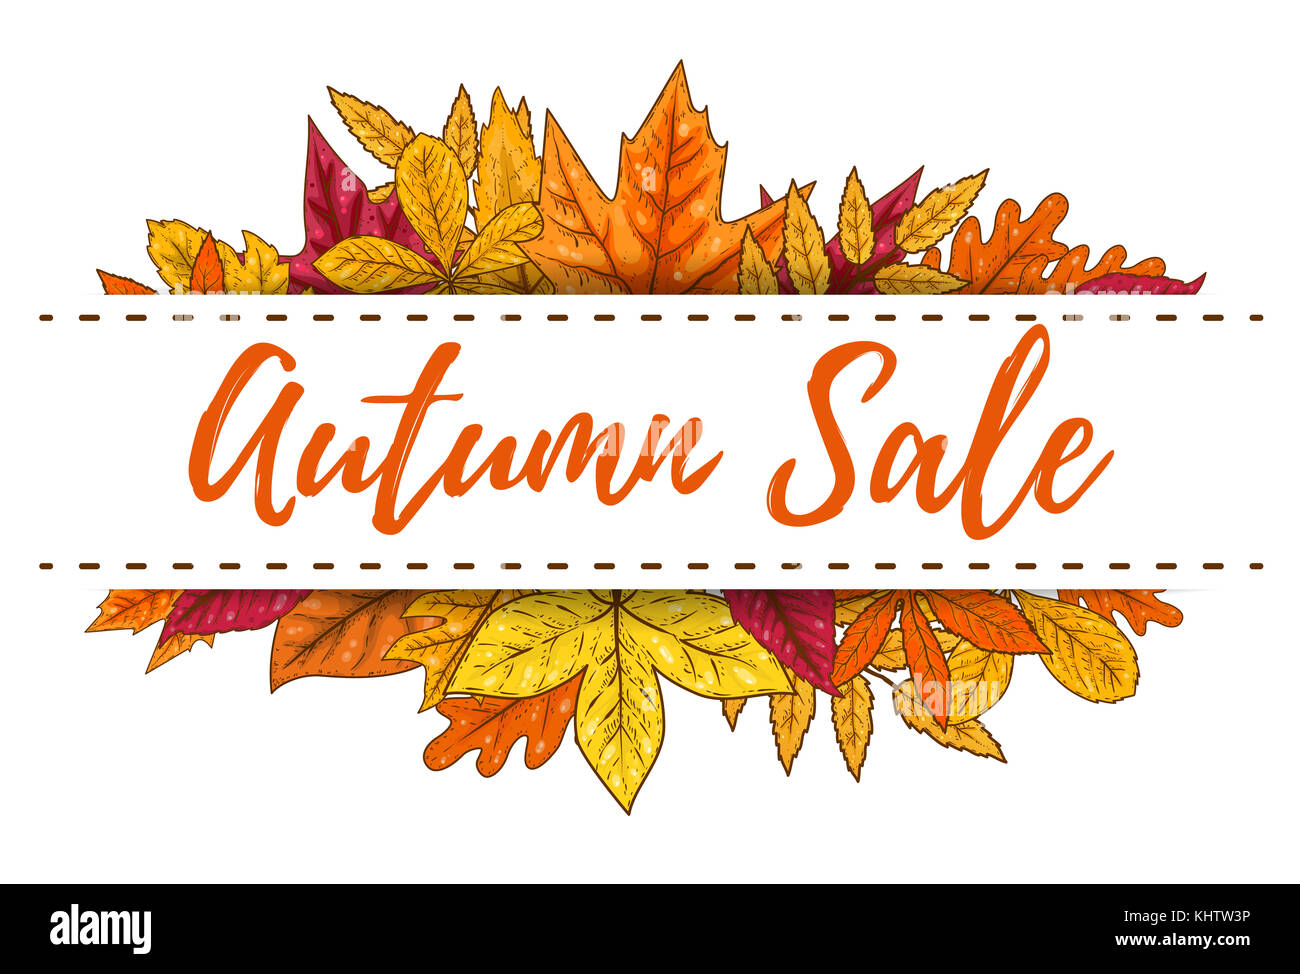 Autumn sale banner template with yellow leaves. Design elements for poster, emblem, banner. Vector illustration Stock Photo